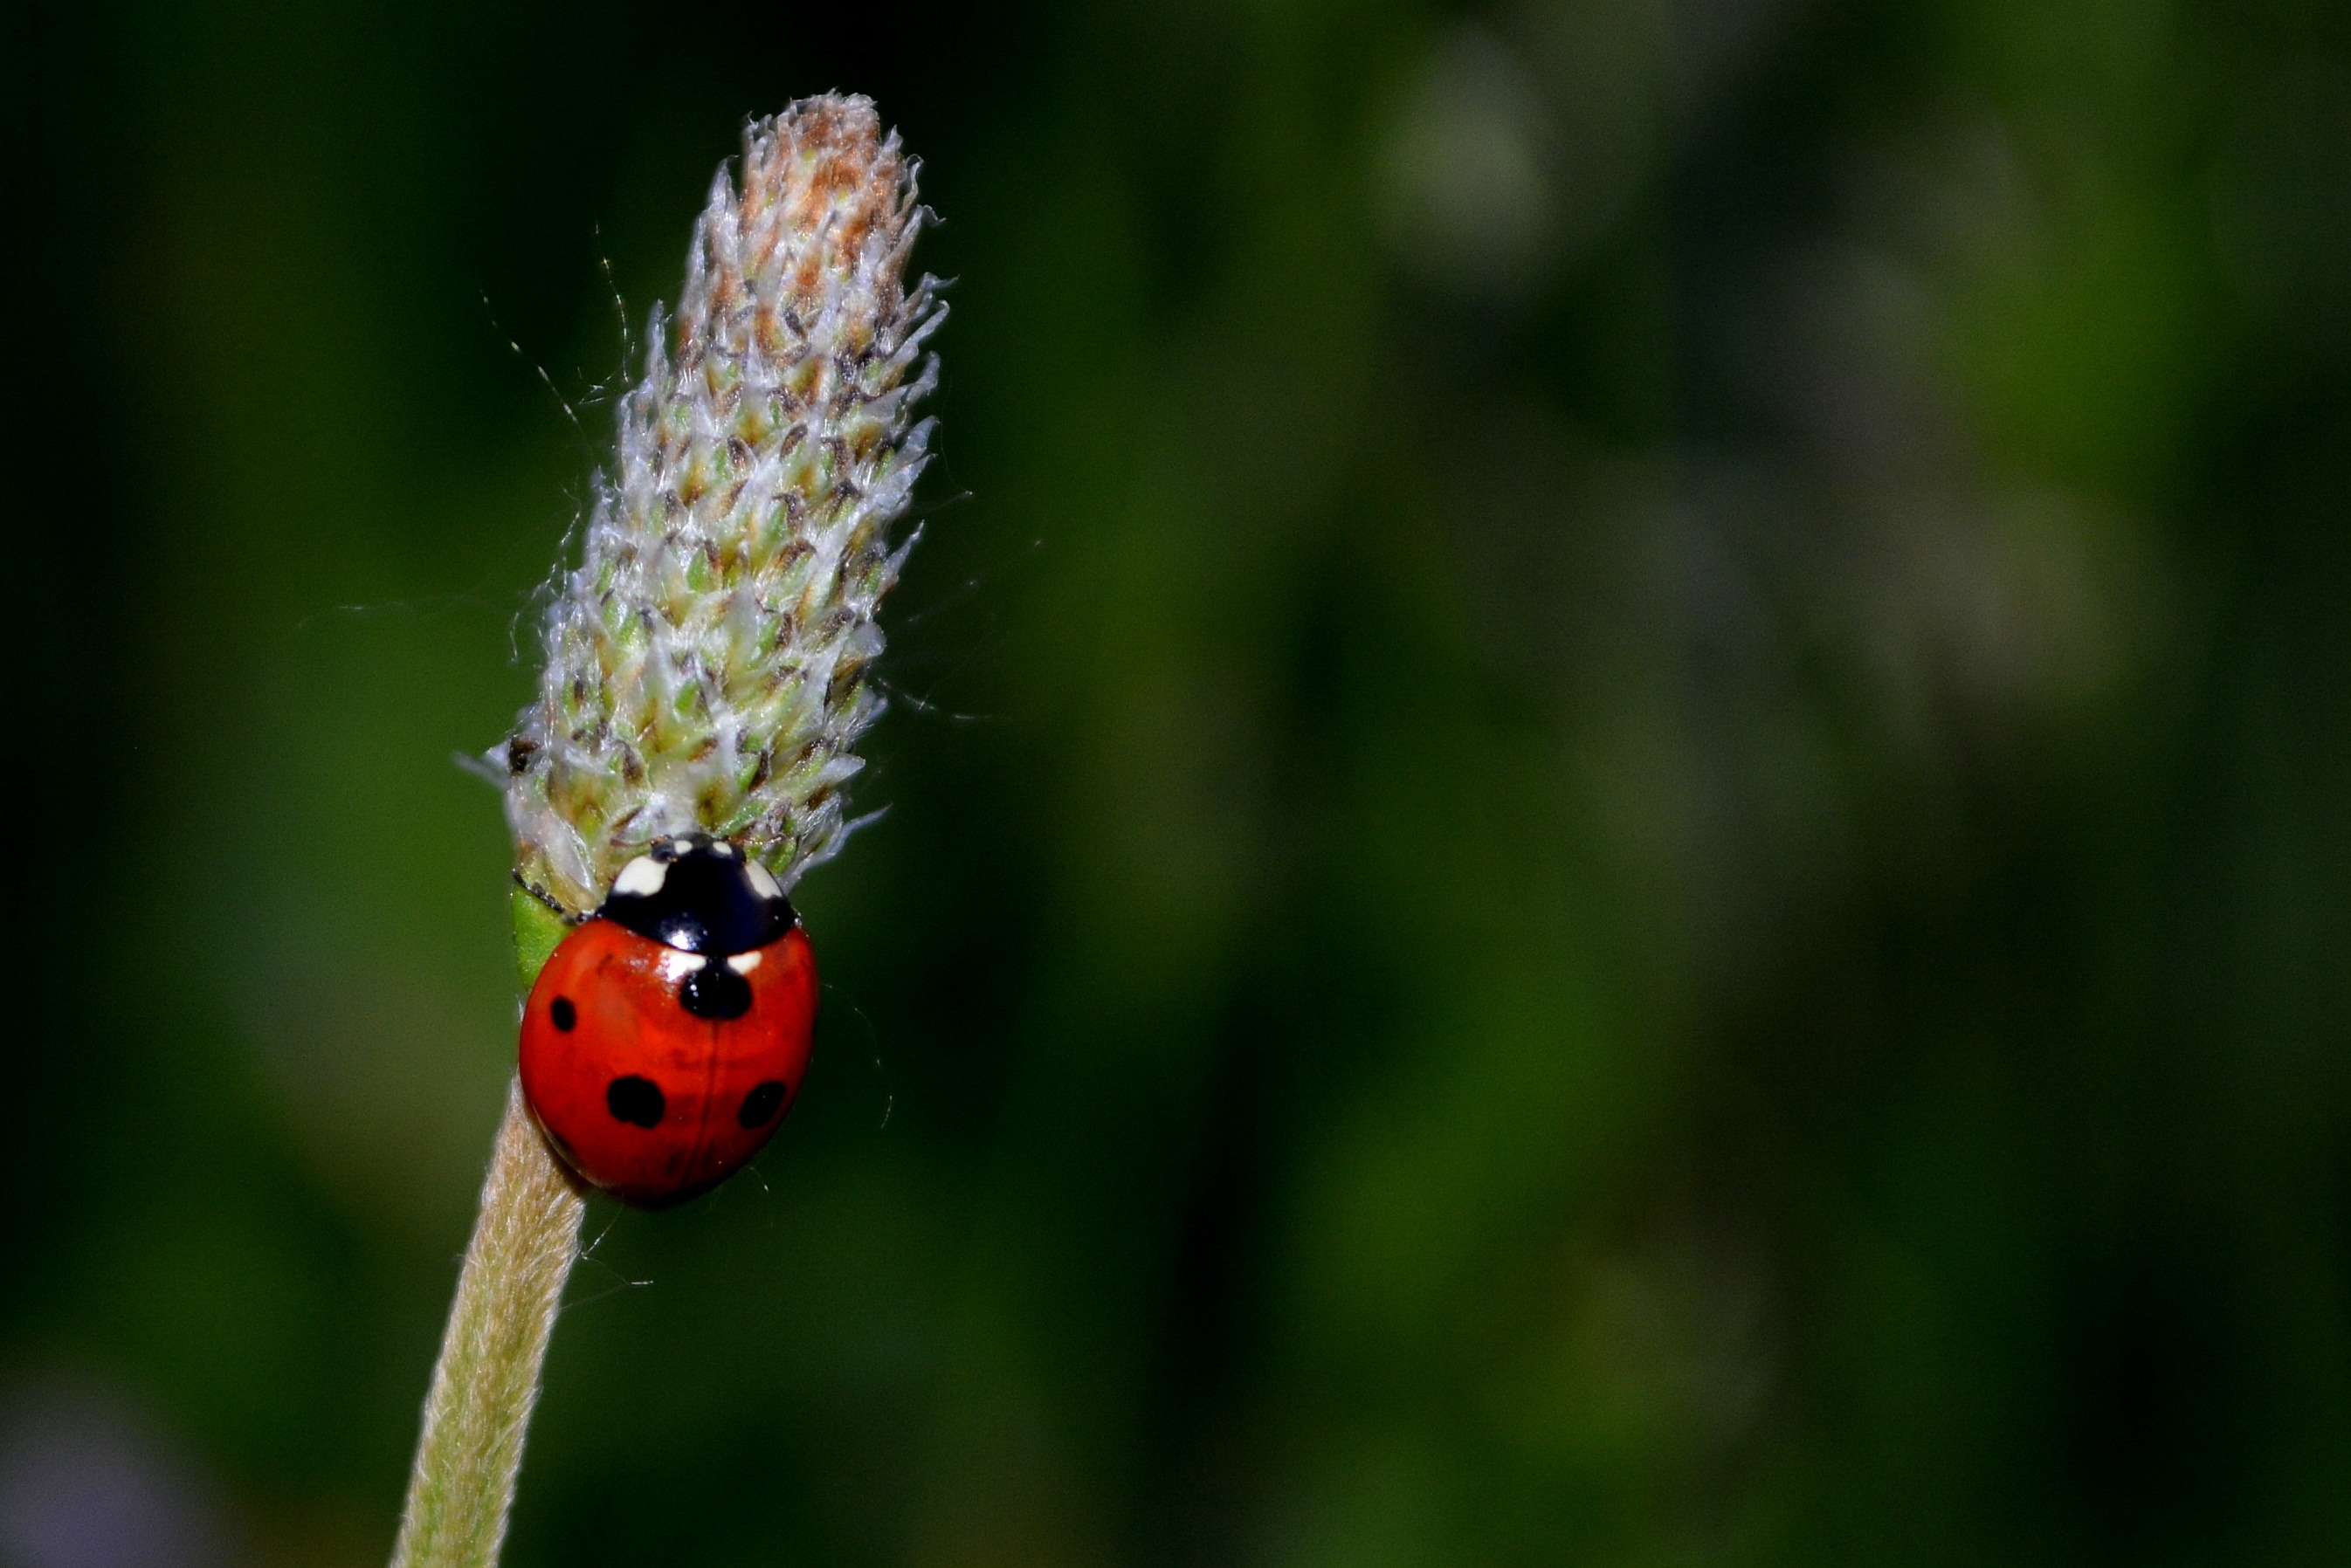 Baja, Insecta, Grass, Flower, ladybug, insect